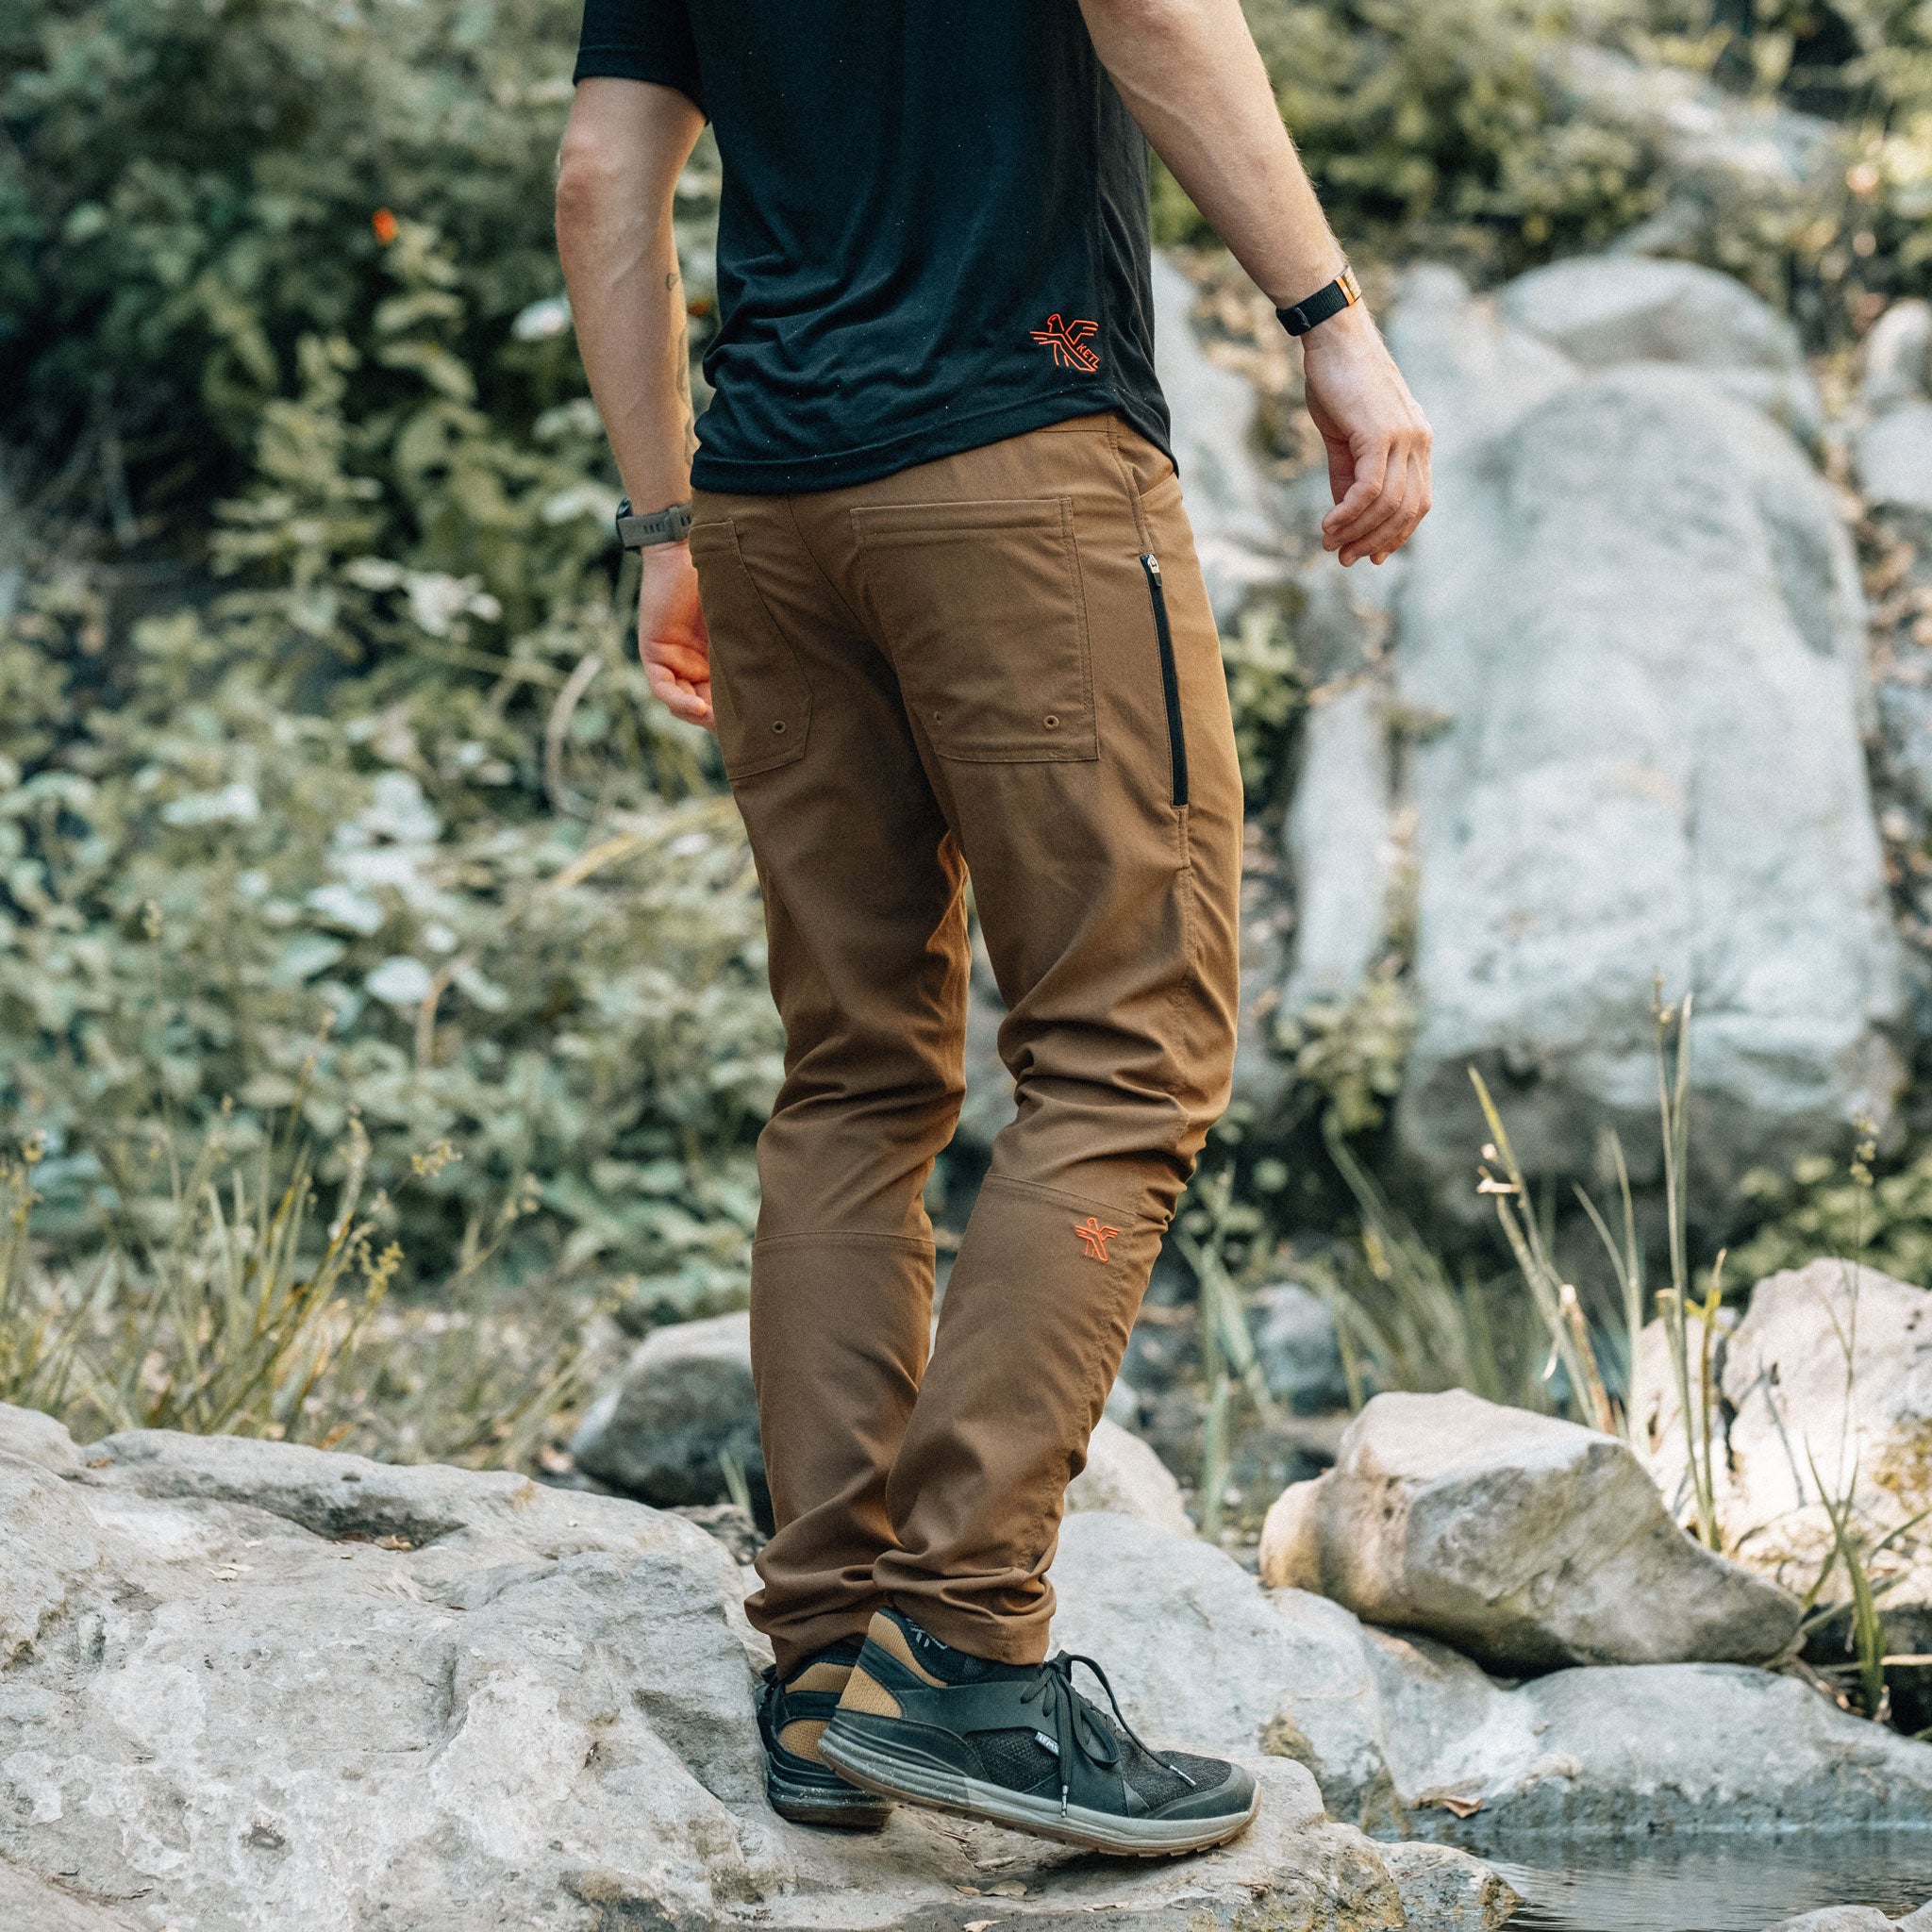 KETL Mtn Shenanigan Pant  Durable, Stretchy, Lightweight Outdoor Pant